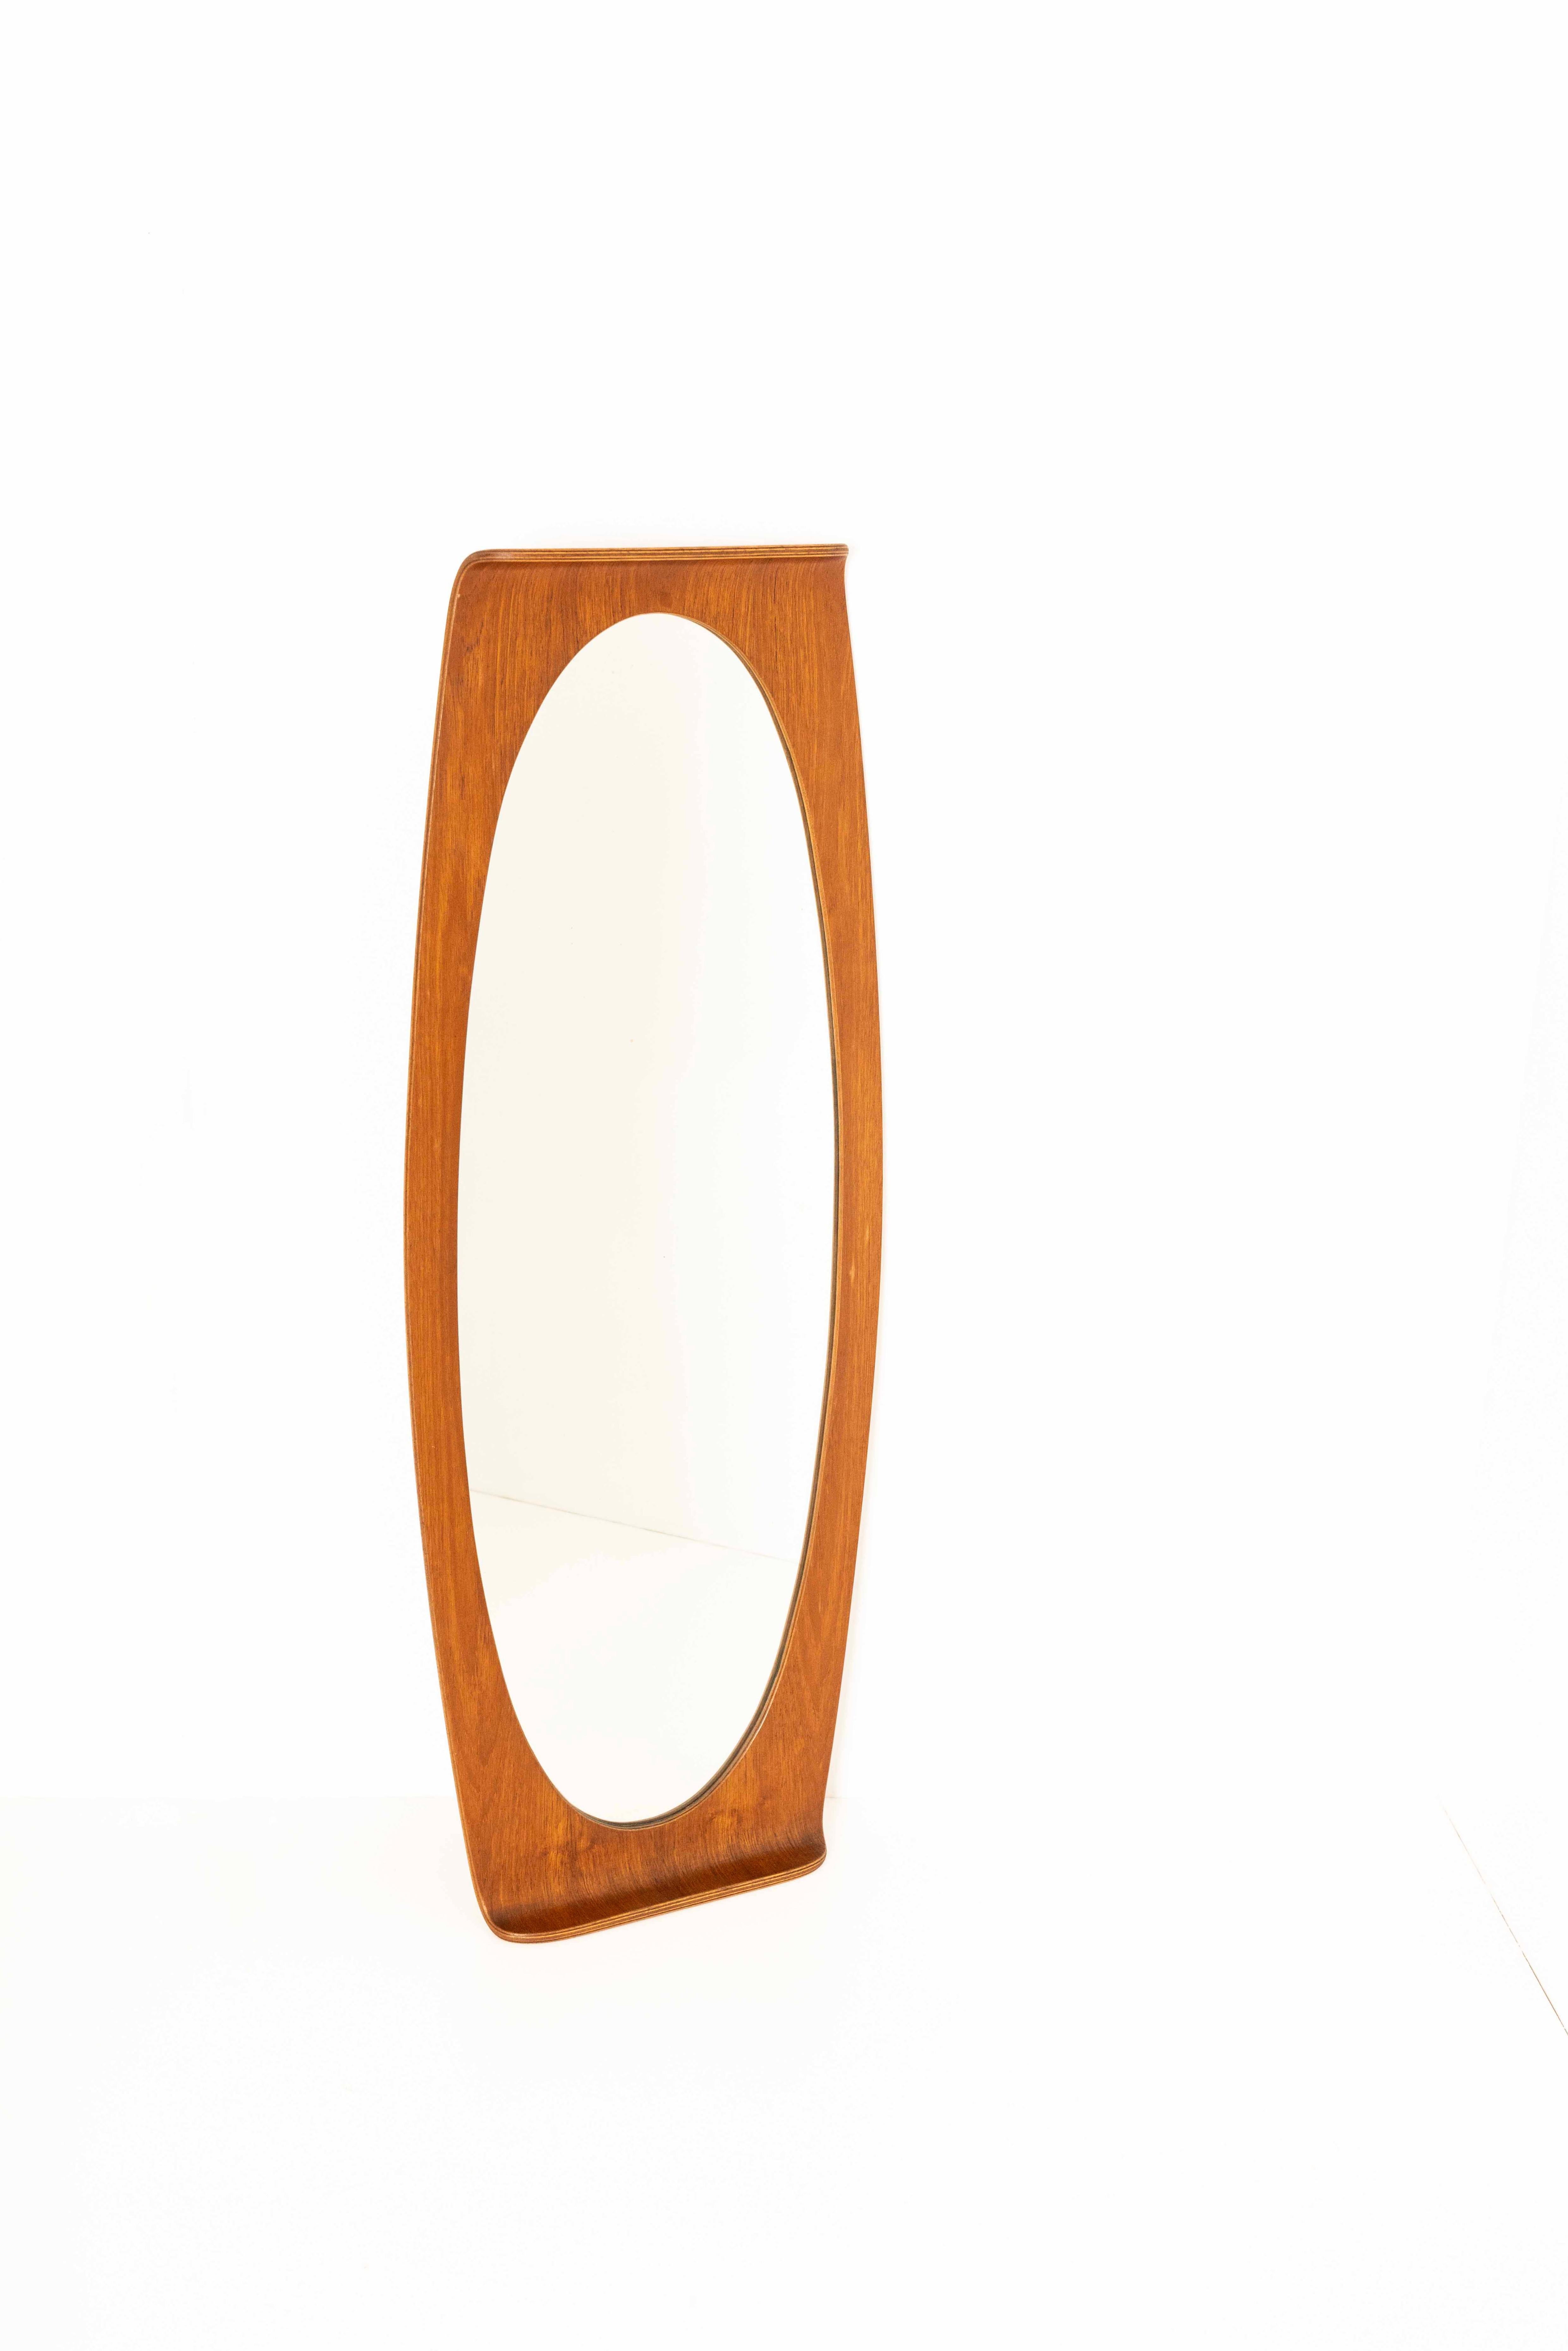 Mid-Century Modern Italian Oval Plywood Mirror by Campo & Graffi for Home, 1960 For Sale